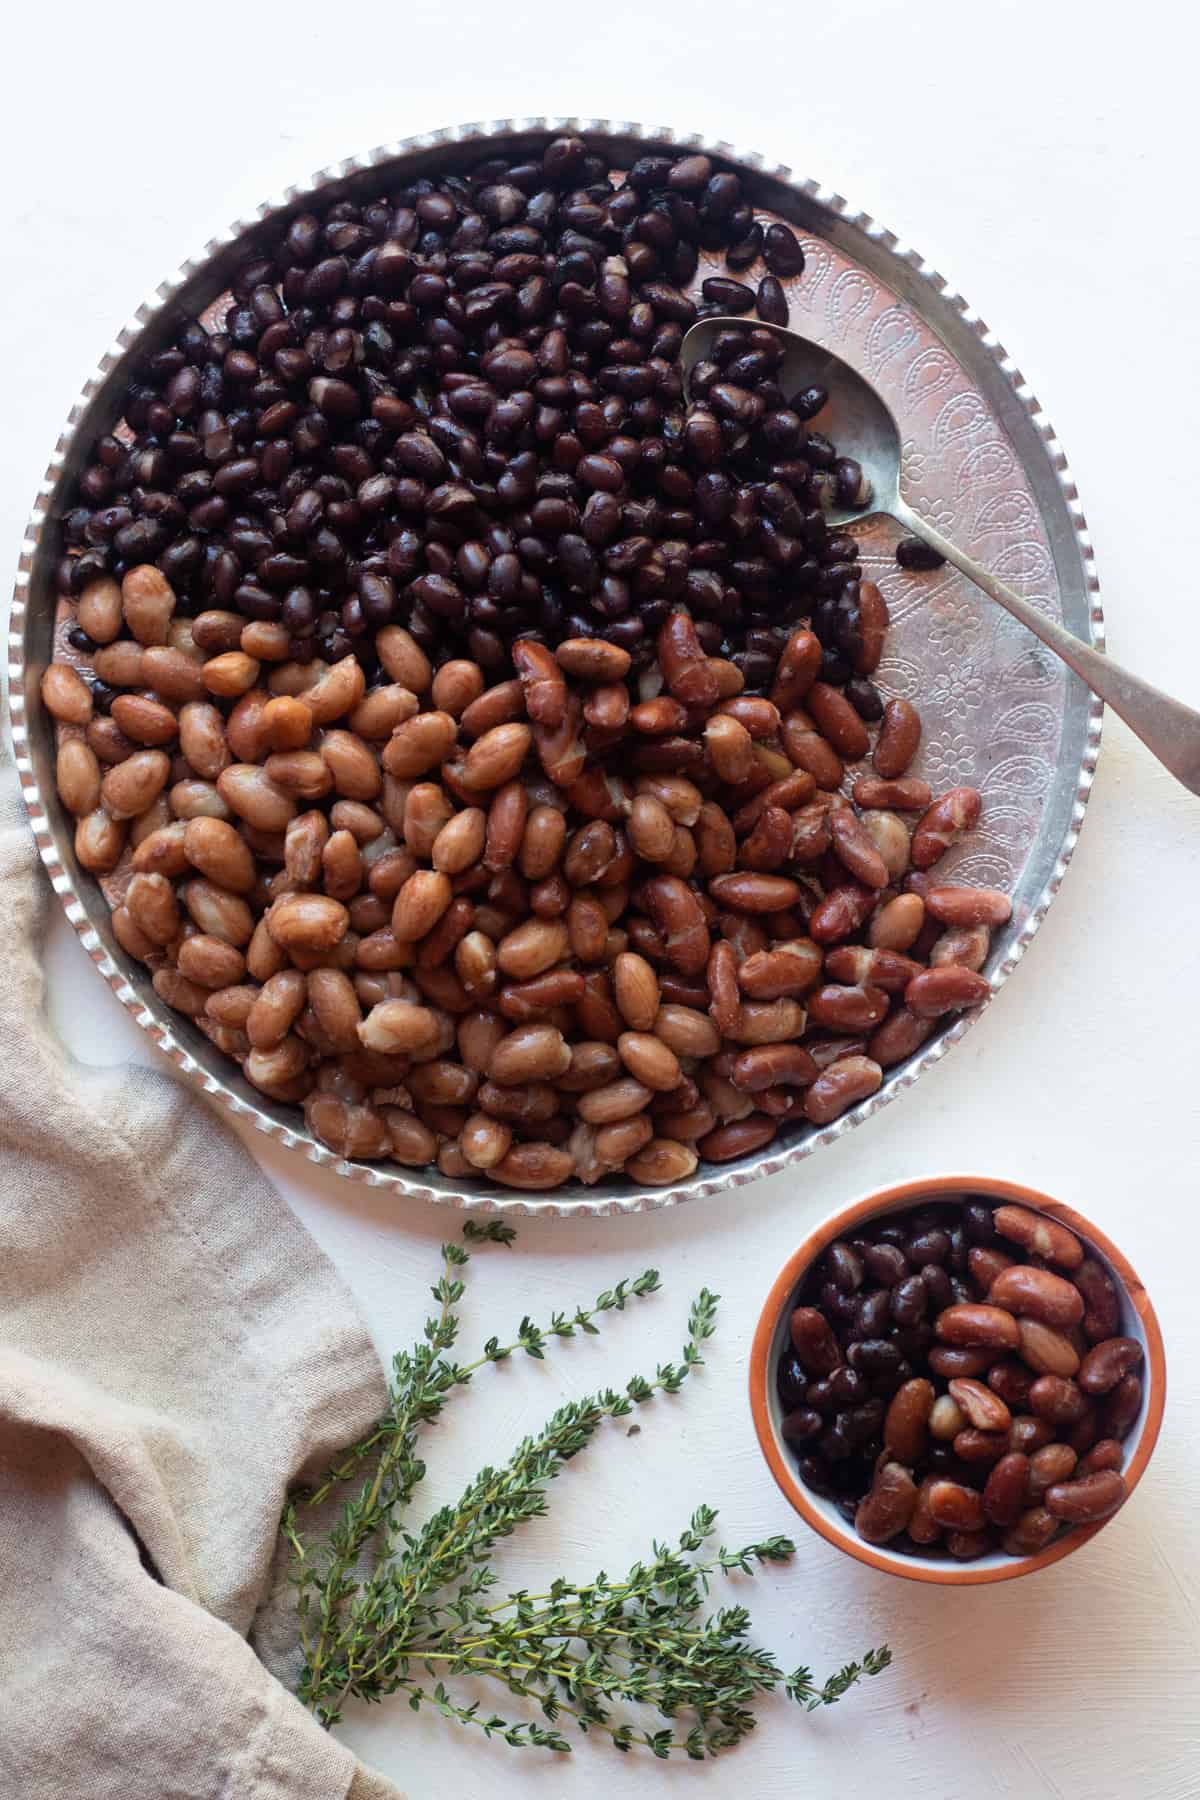 There are so many ways you can use cooked beans such as salads, stews and wraps. You can also freeze them to use up later. 